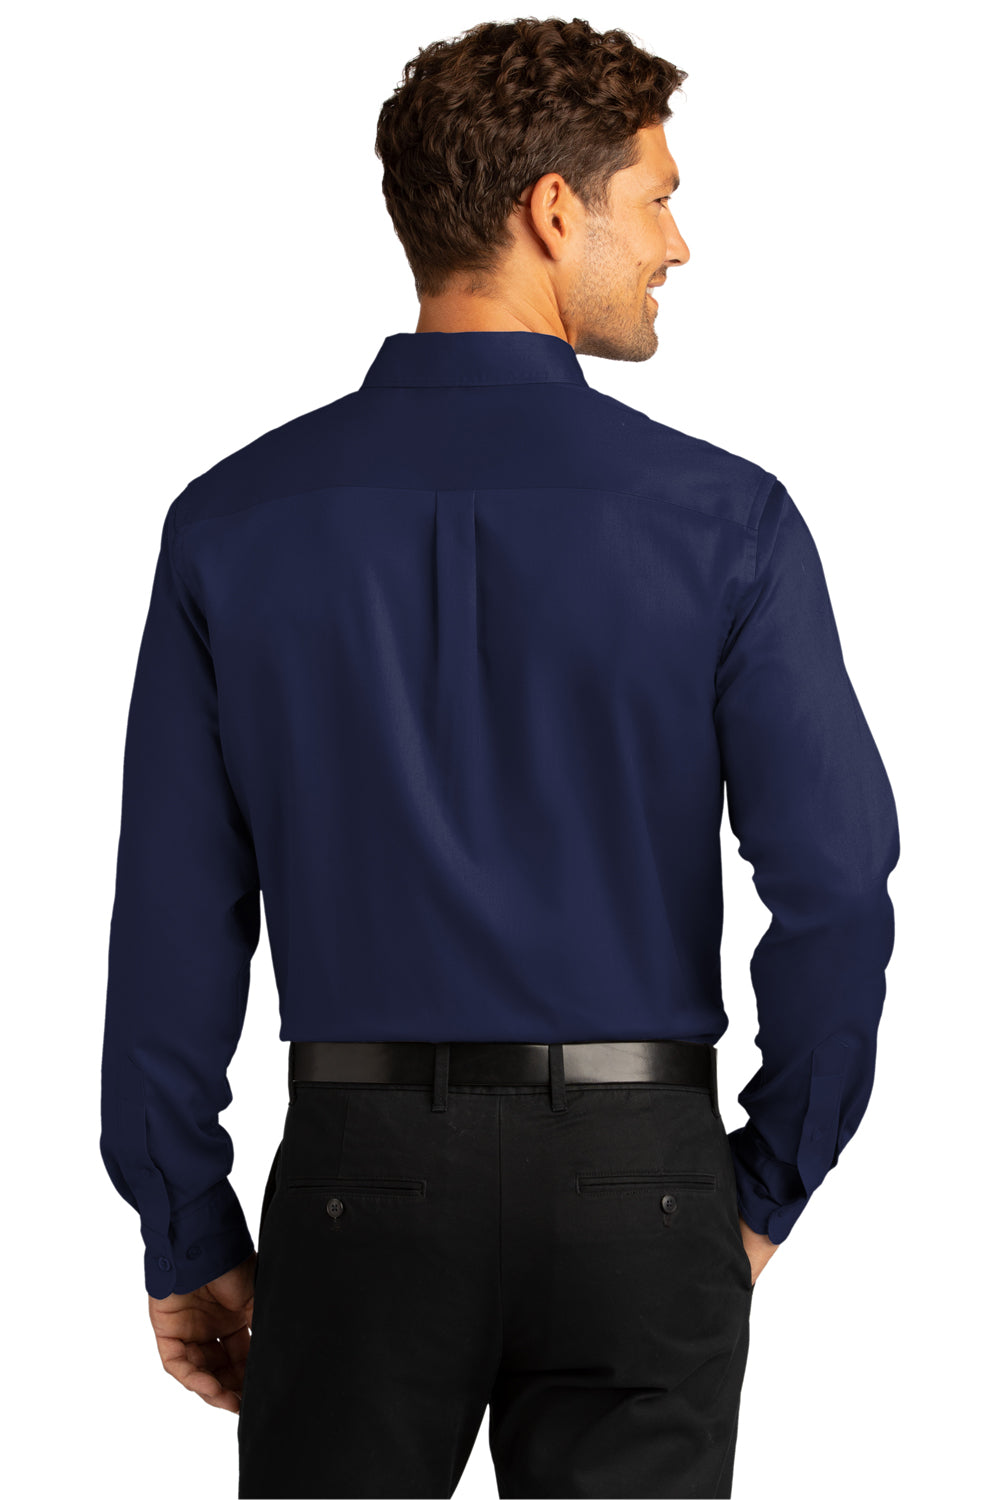 Port Authority Mens SuperPro Wrinkle Resistant React Long Sleeve Button Down Shirt w/ Pocket True Navy Blue Side